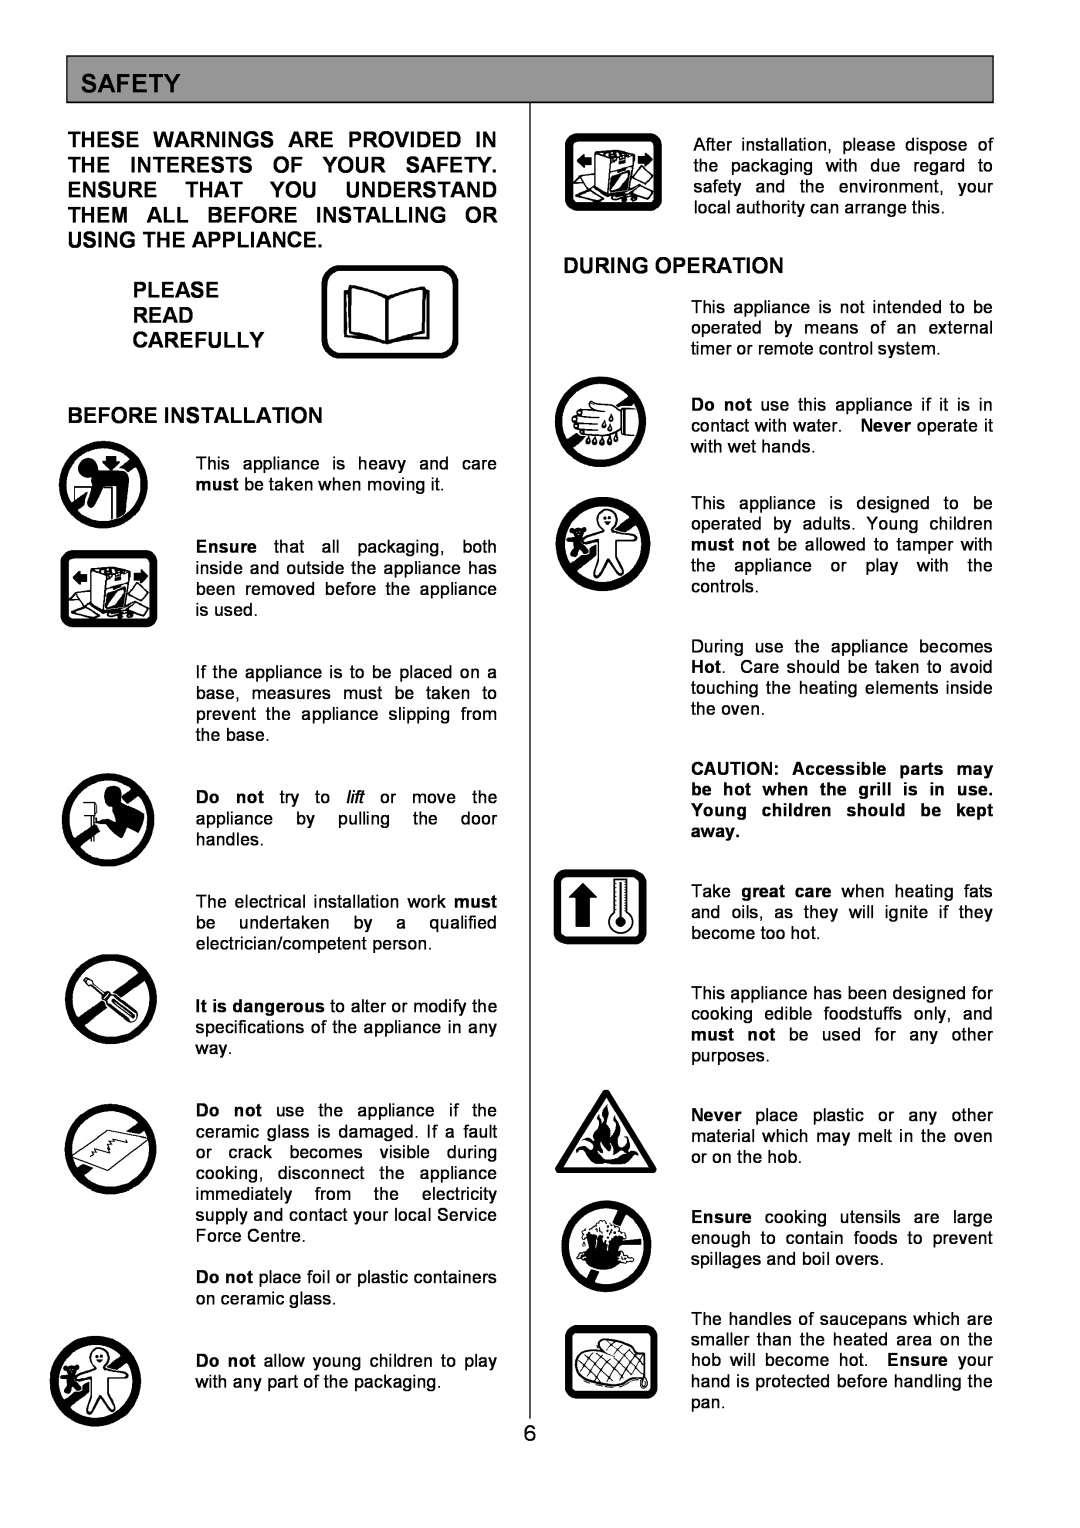 Tricity Bendix SIE454 installation instructions Safety, Please Read Carefully Before Installation, During Operation 